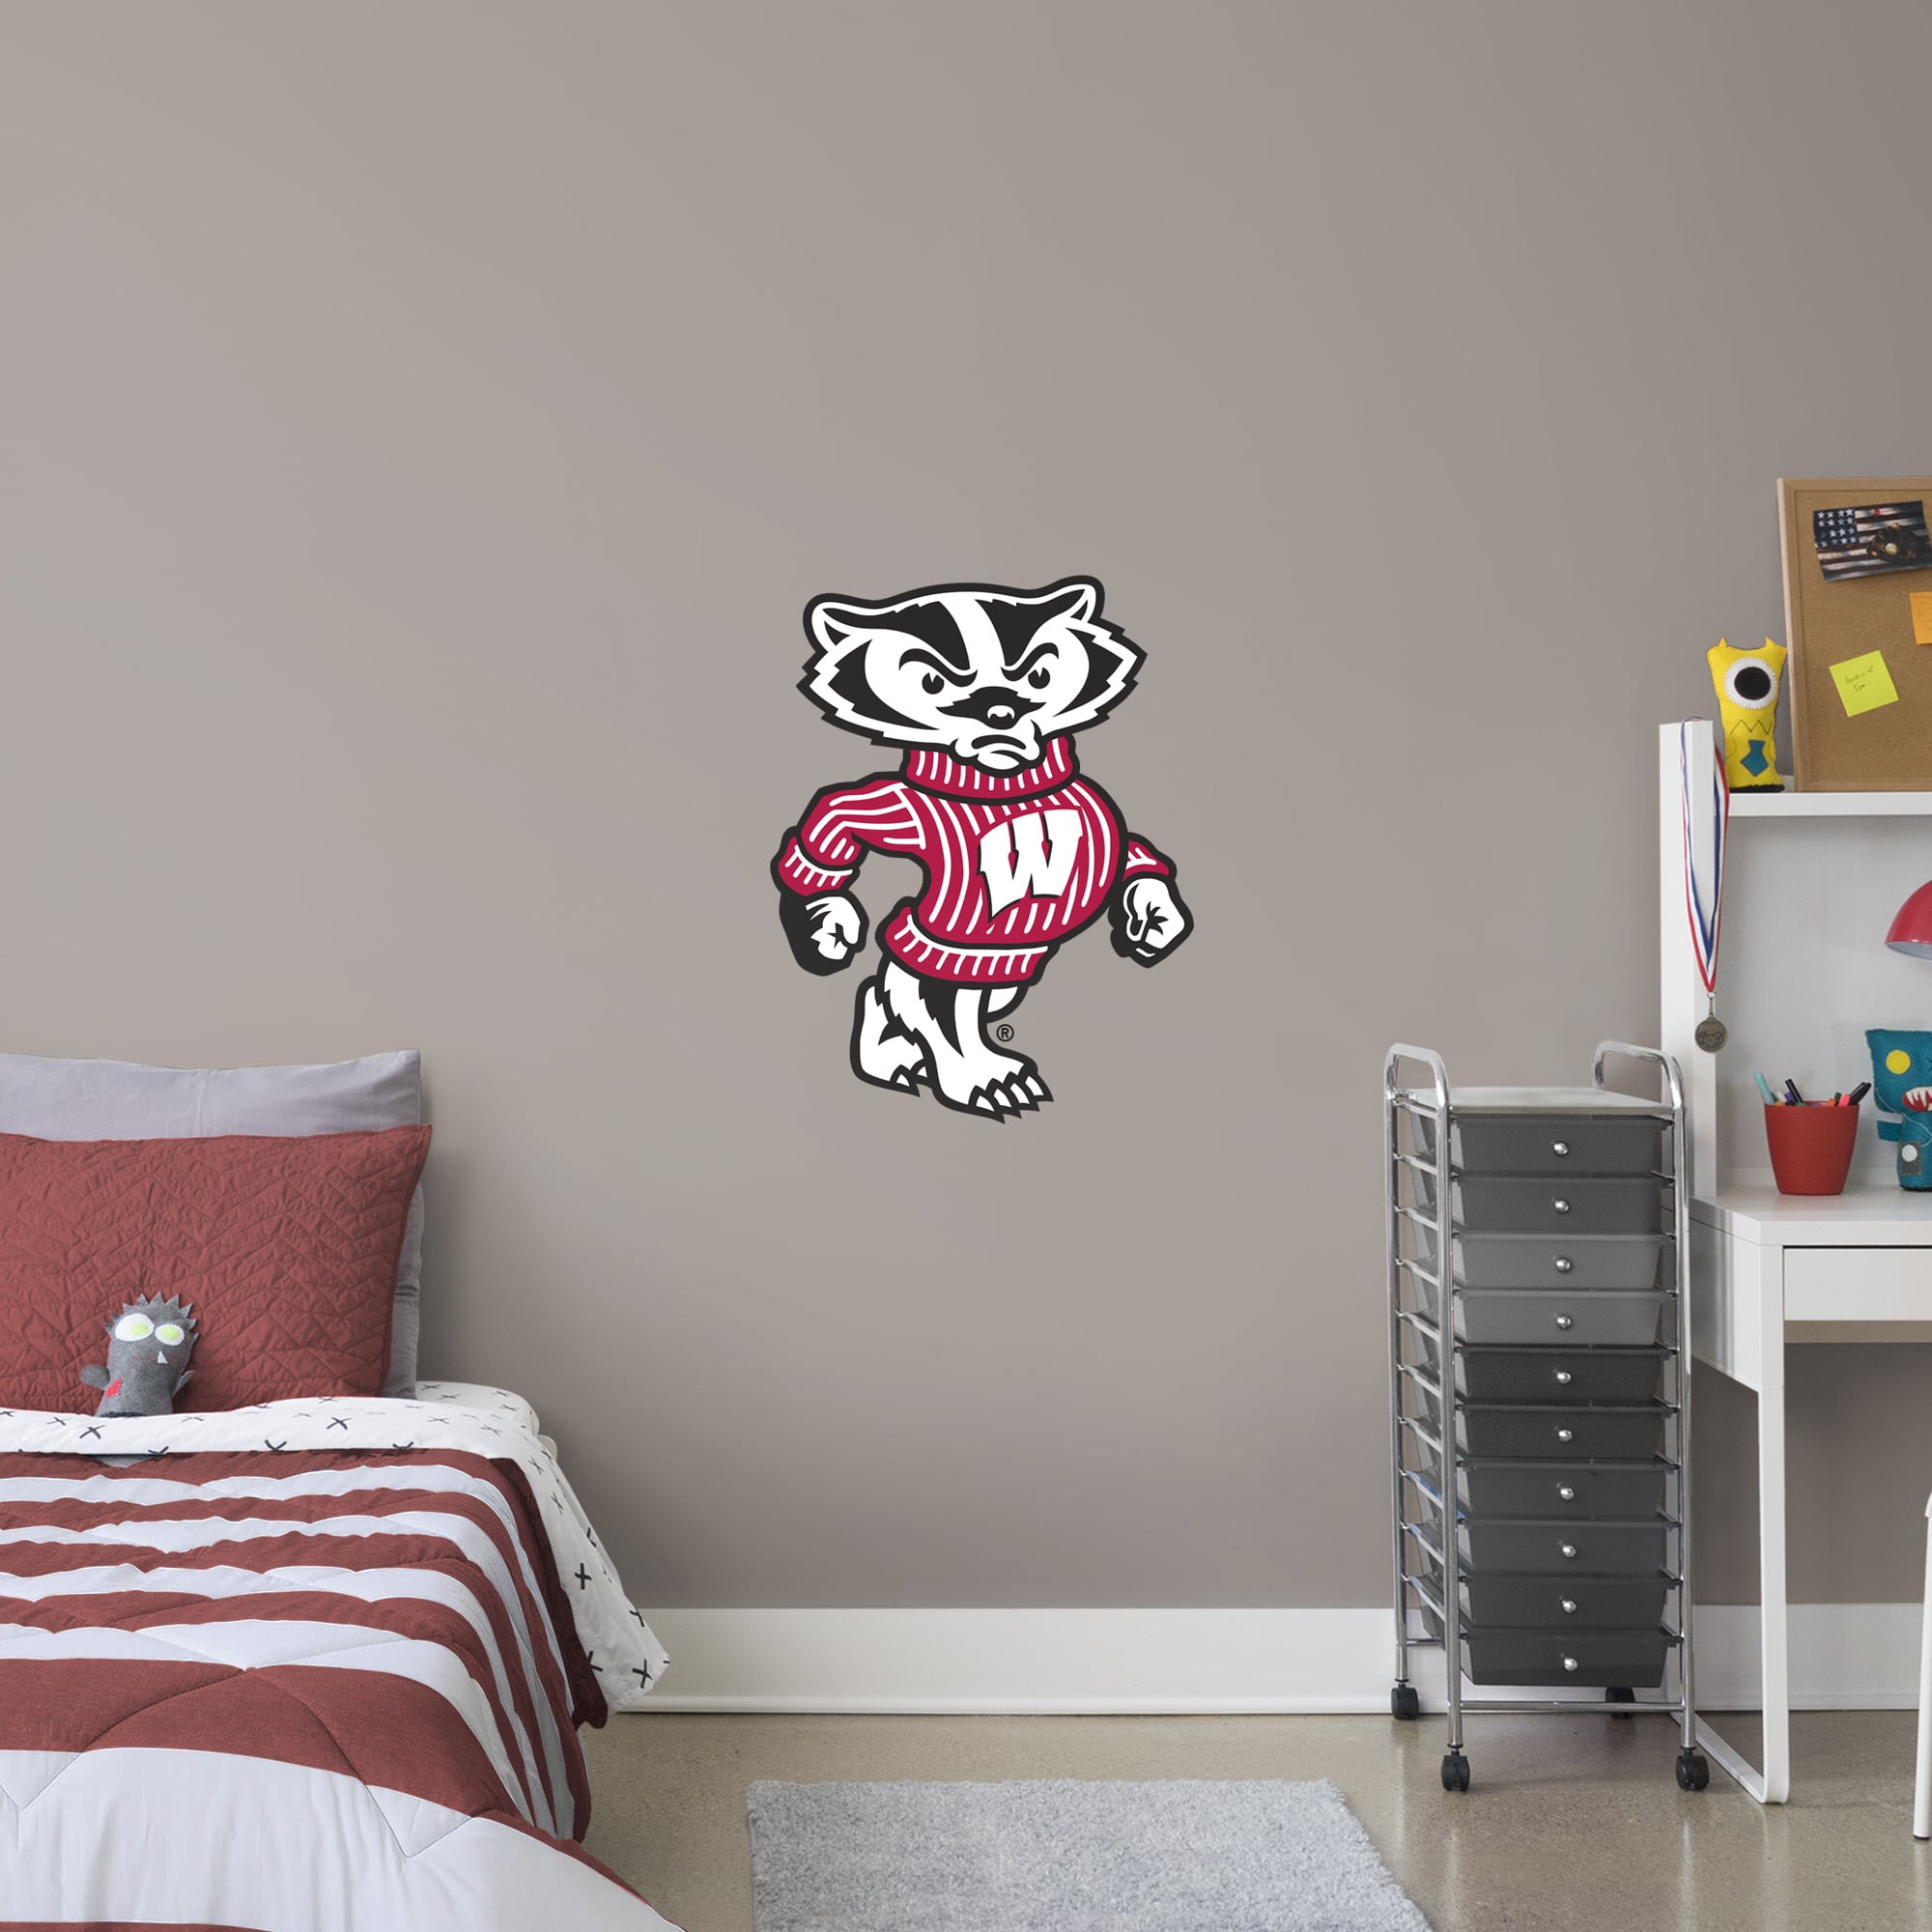 Wisconsin Badgers: Bucky Badger Illustrated Mascot - Officially Licensed Removable Wall Decal XL by Fathead | Vinyl